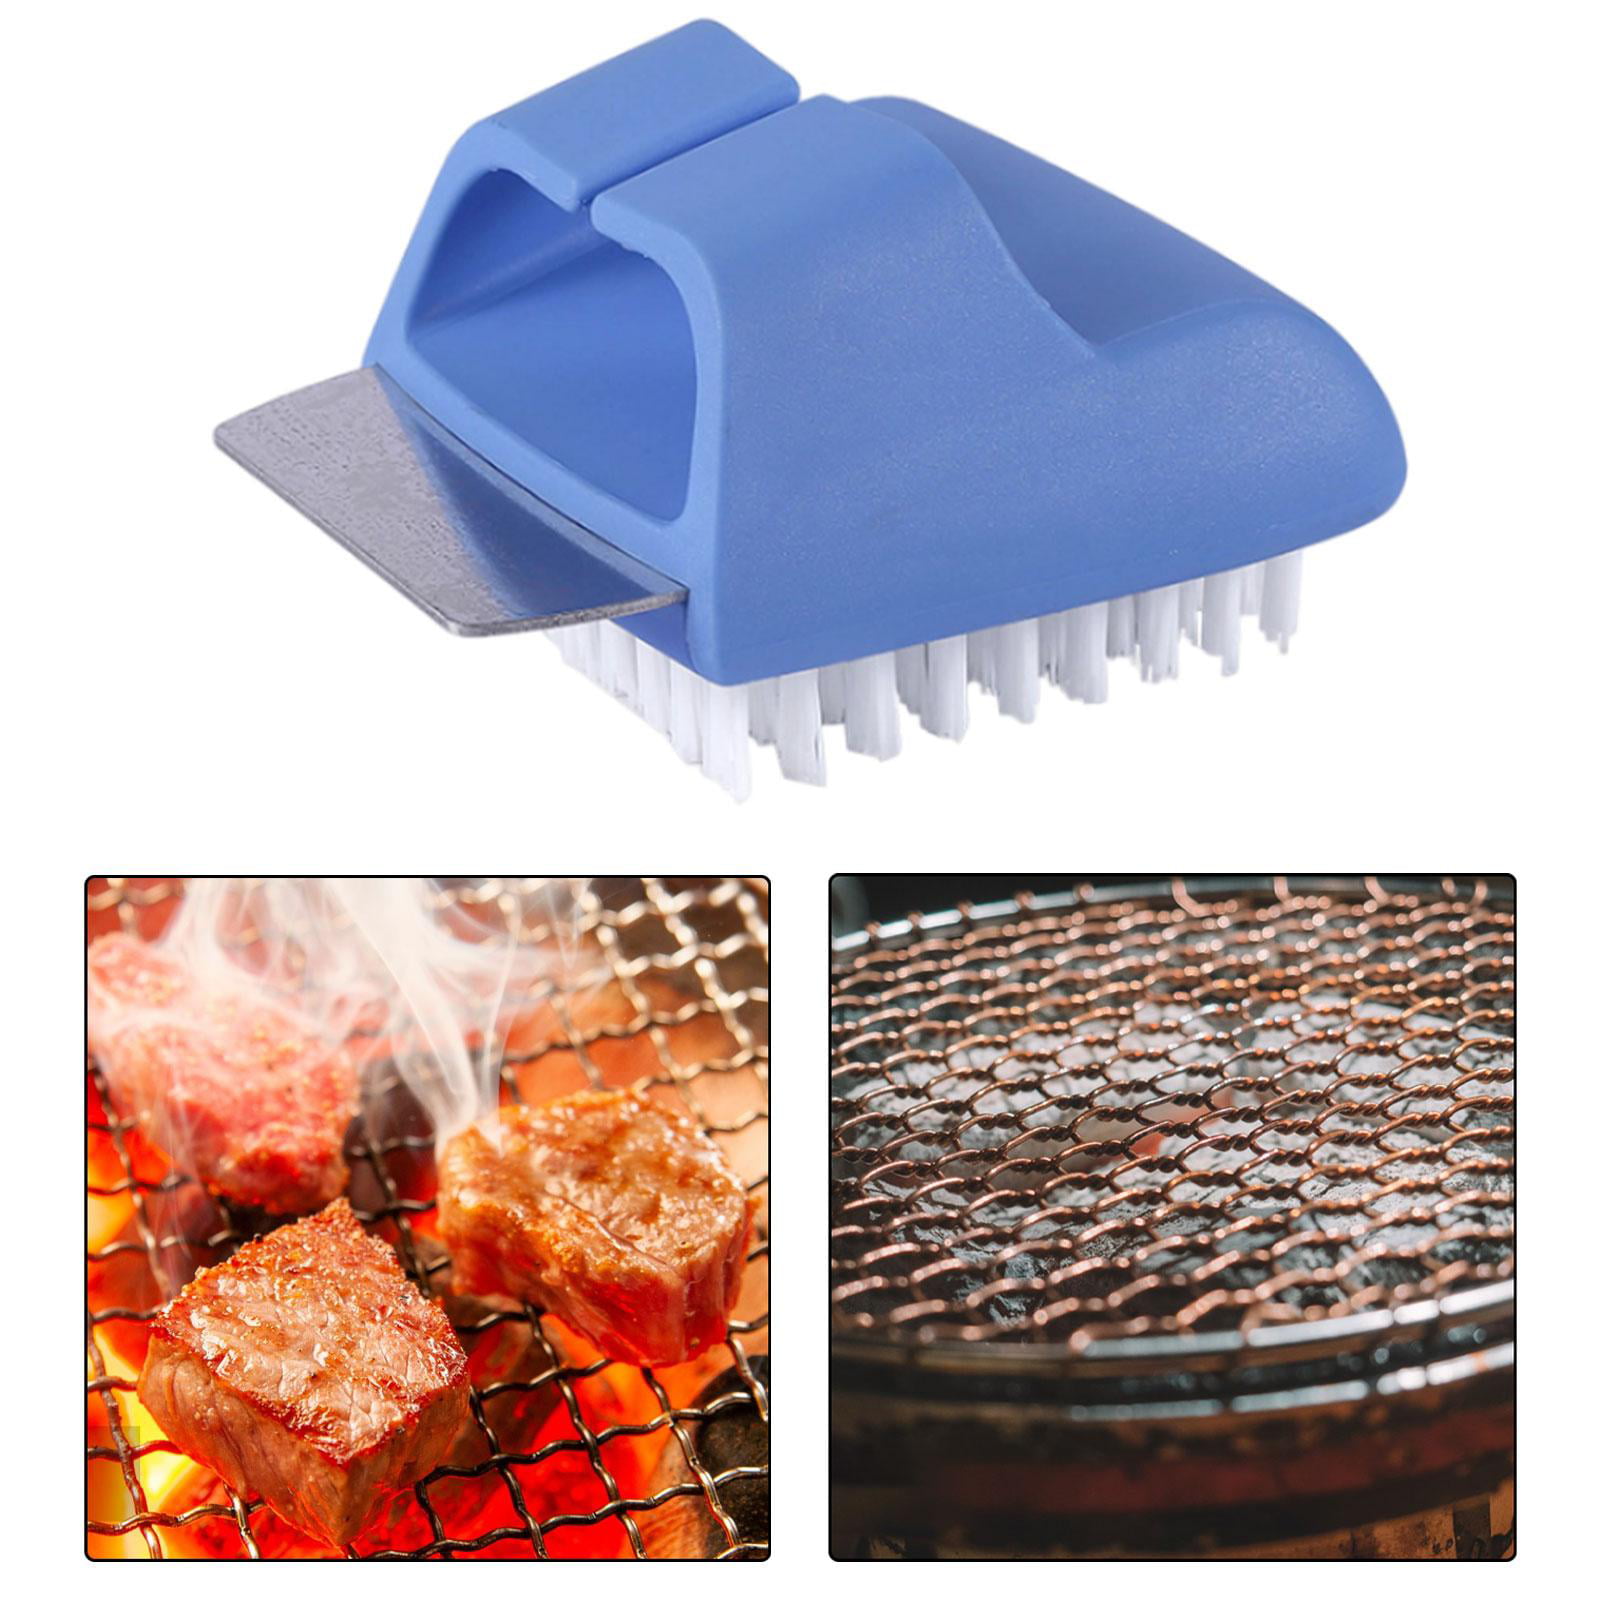 Grill Brush and Scraper Barbecue Brushes Anti Scald Portable Outdoor Grill  Brush Grilling Grate Cleaner for Grilling Rack Dad Gifts Camping Green 